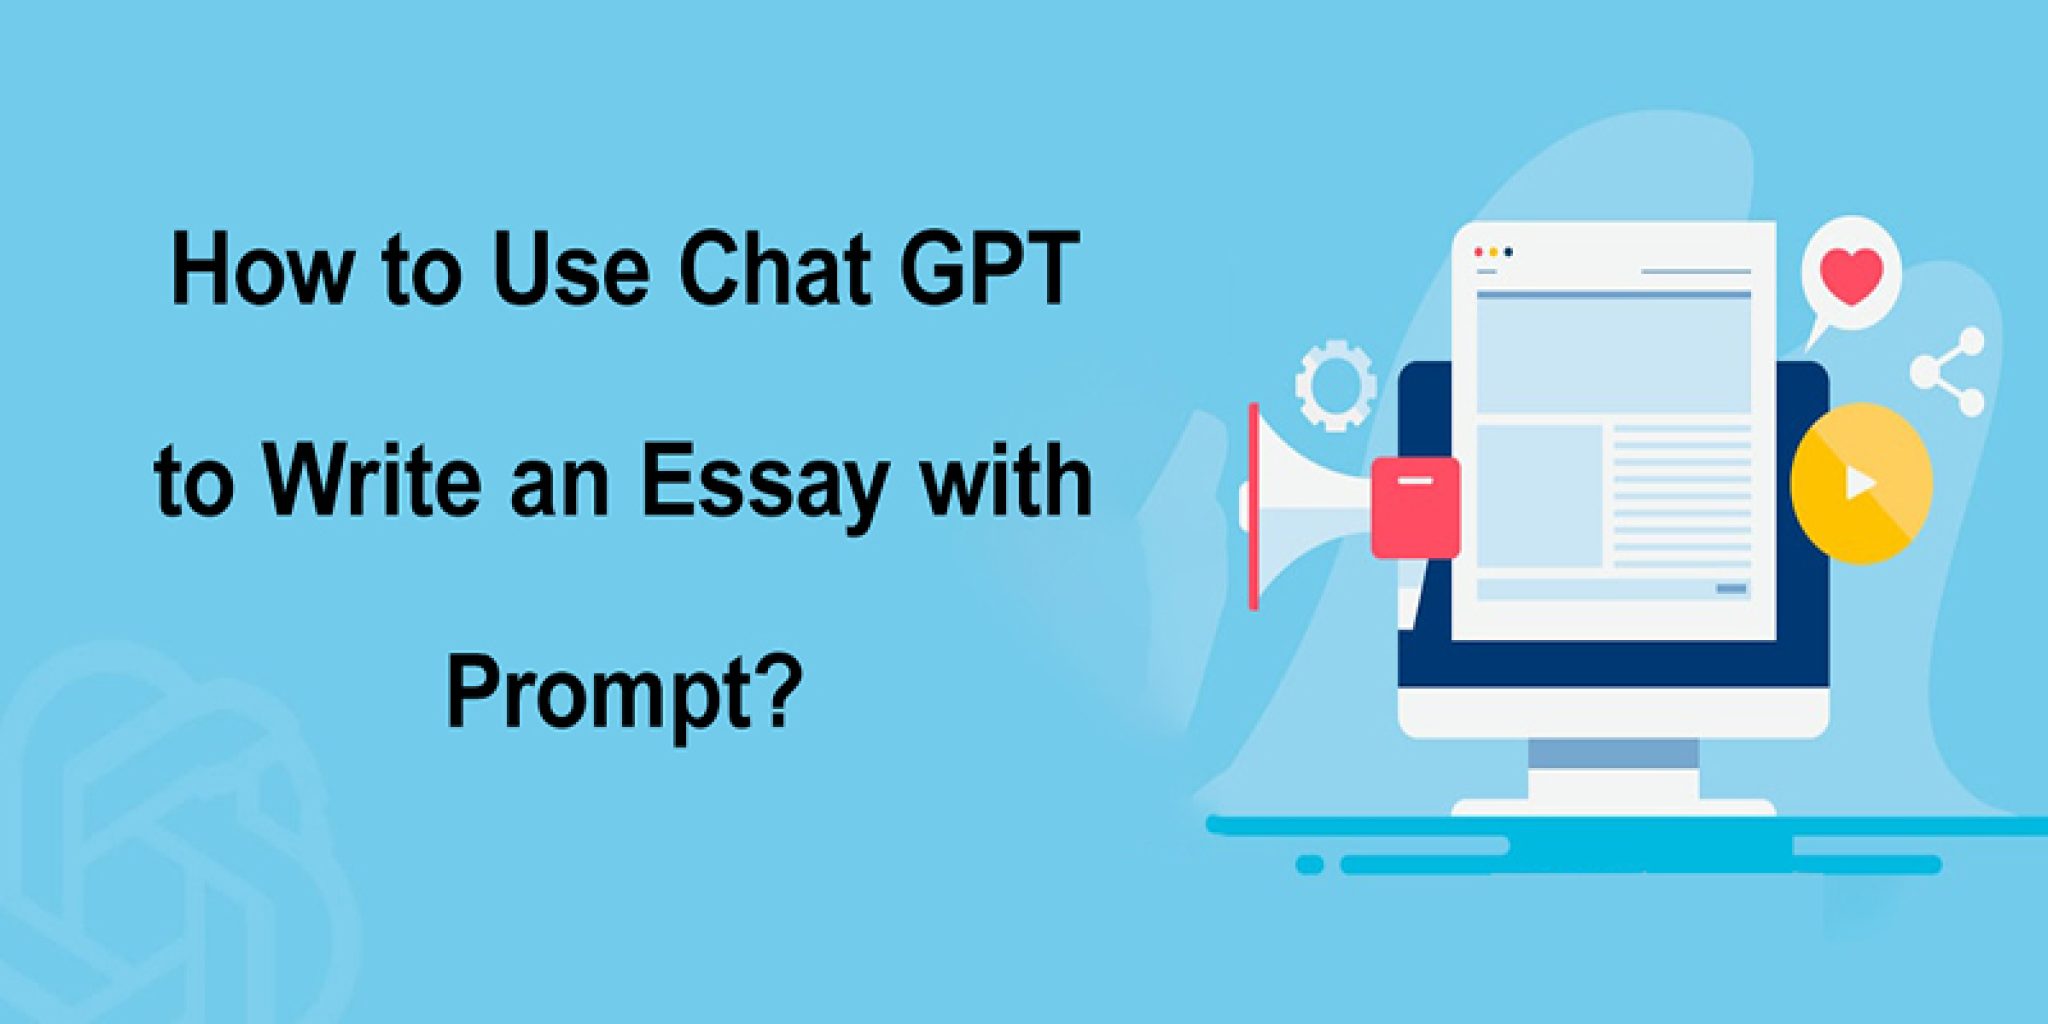 can chat gpt write essays for you